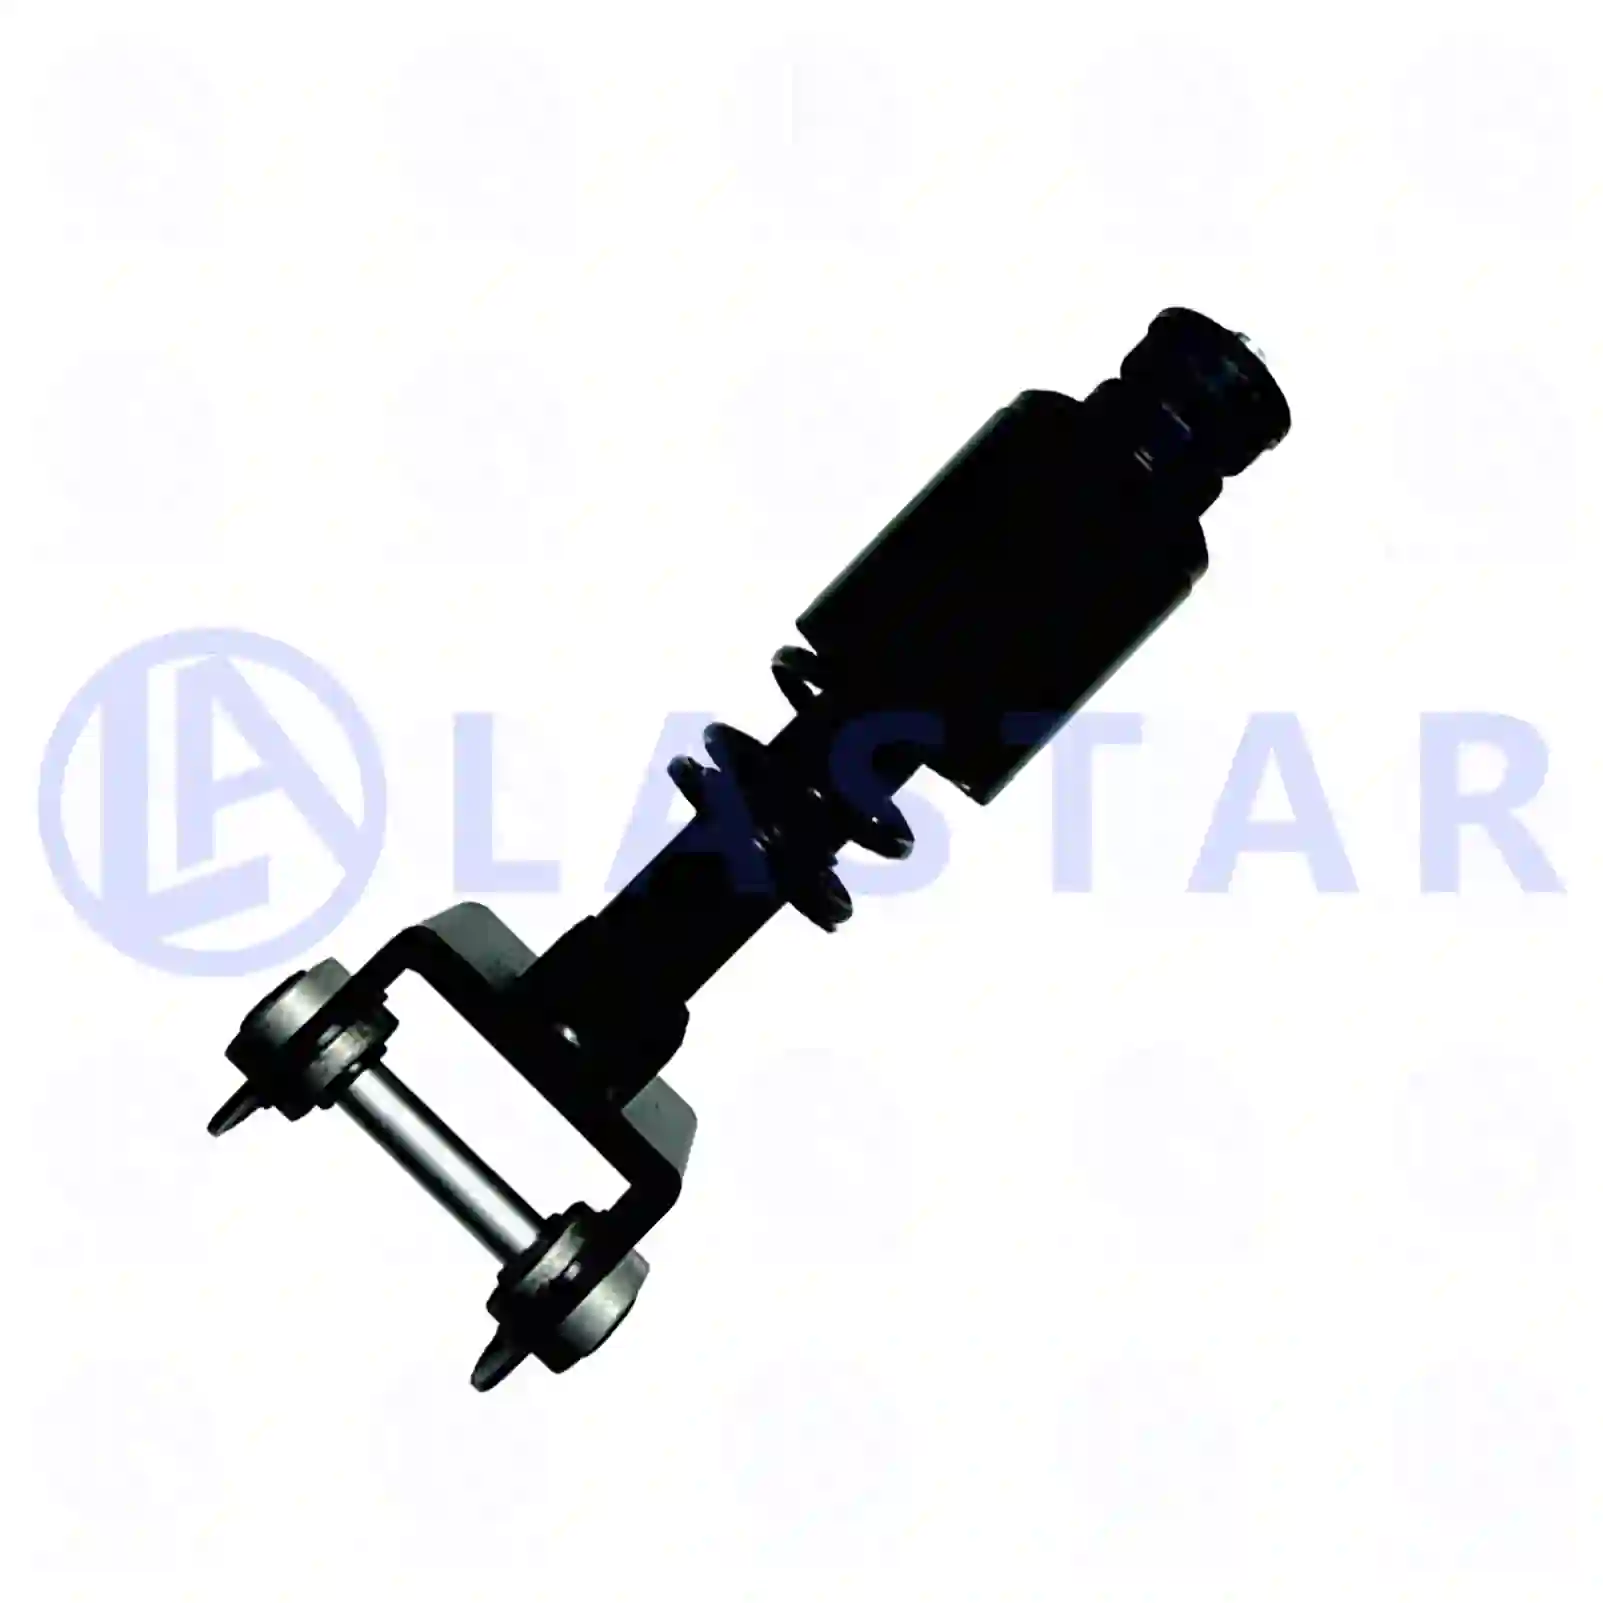 Cabin shock absorber, with spring, 77735473, 5010532895, 7482052897, 82052897 ||  77735473 Lastar Spare Part | Truck Spare Parts, Auotomotive Spare Parts Cabin shock absorber, with spring, 77735473, 5010532895, 7482052897, 82052897 ||  77735473 Lastar Spare Part | Truck Spare Parts, Auotomotive Spare Parts